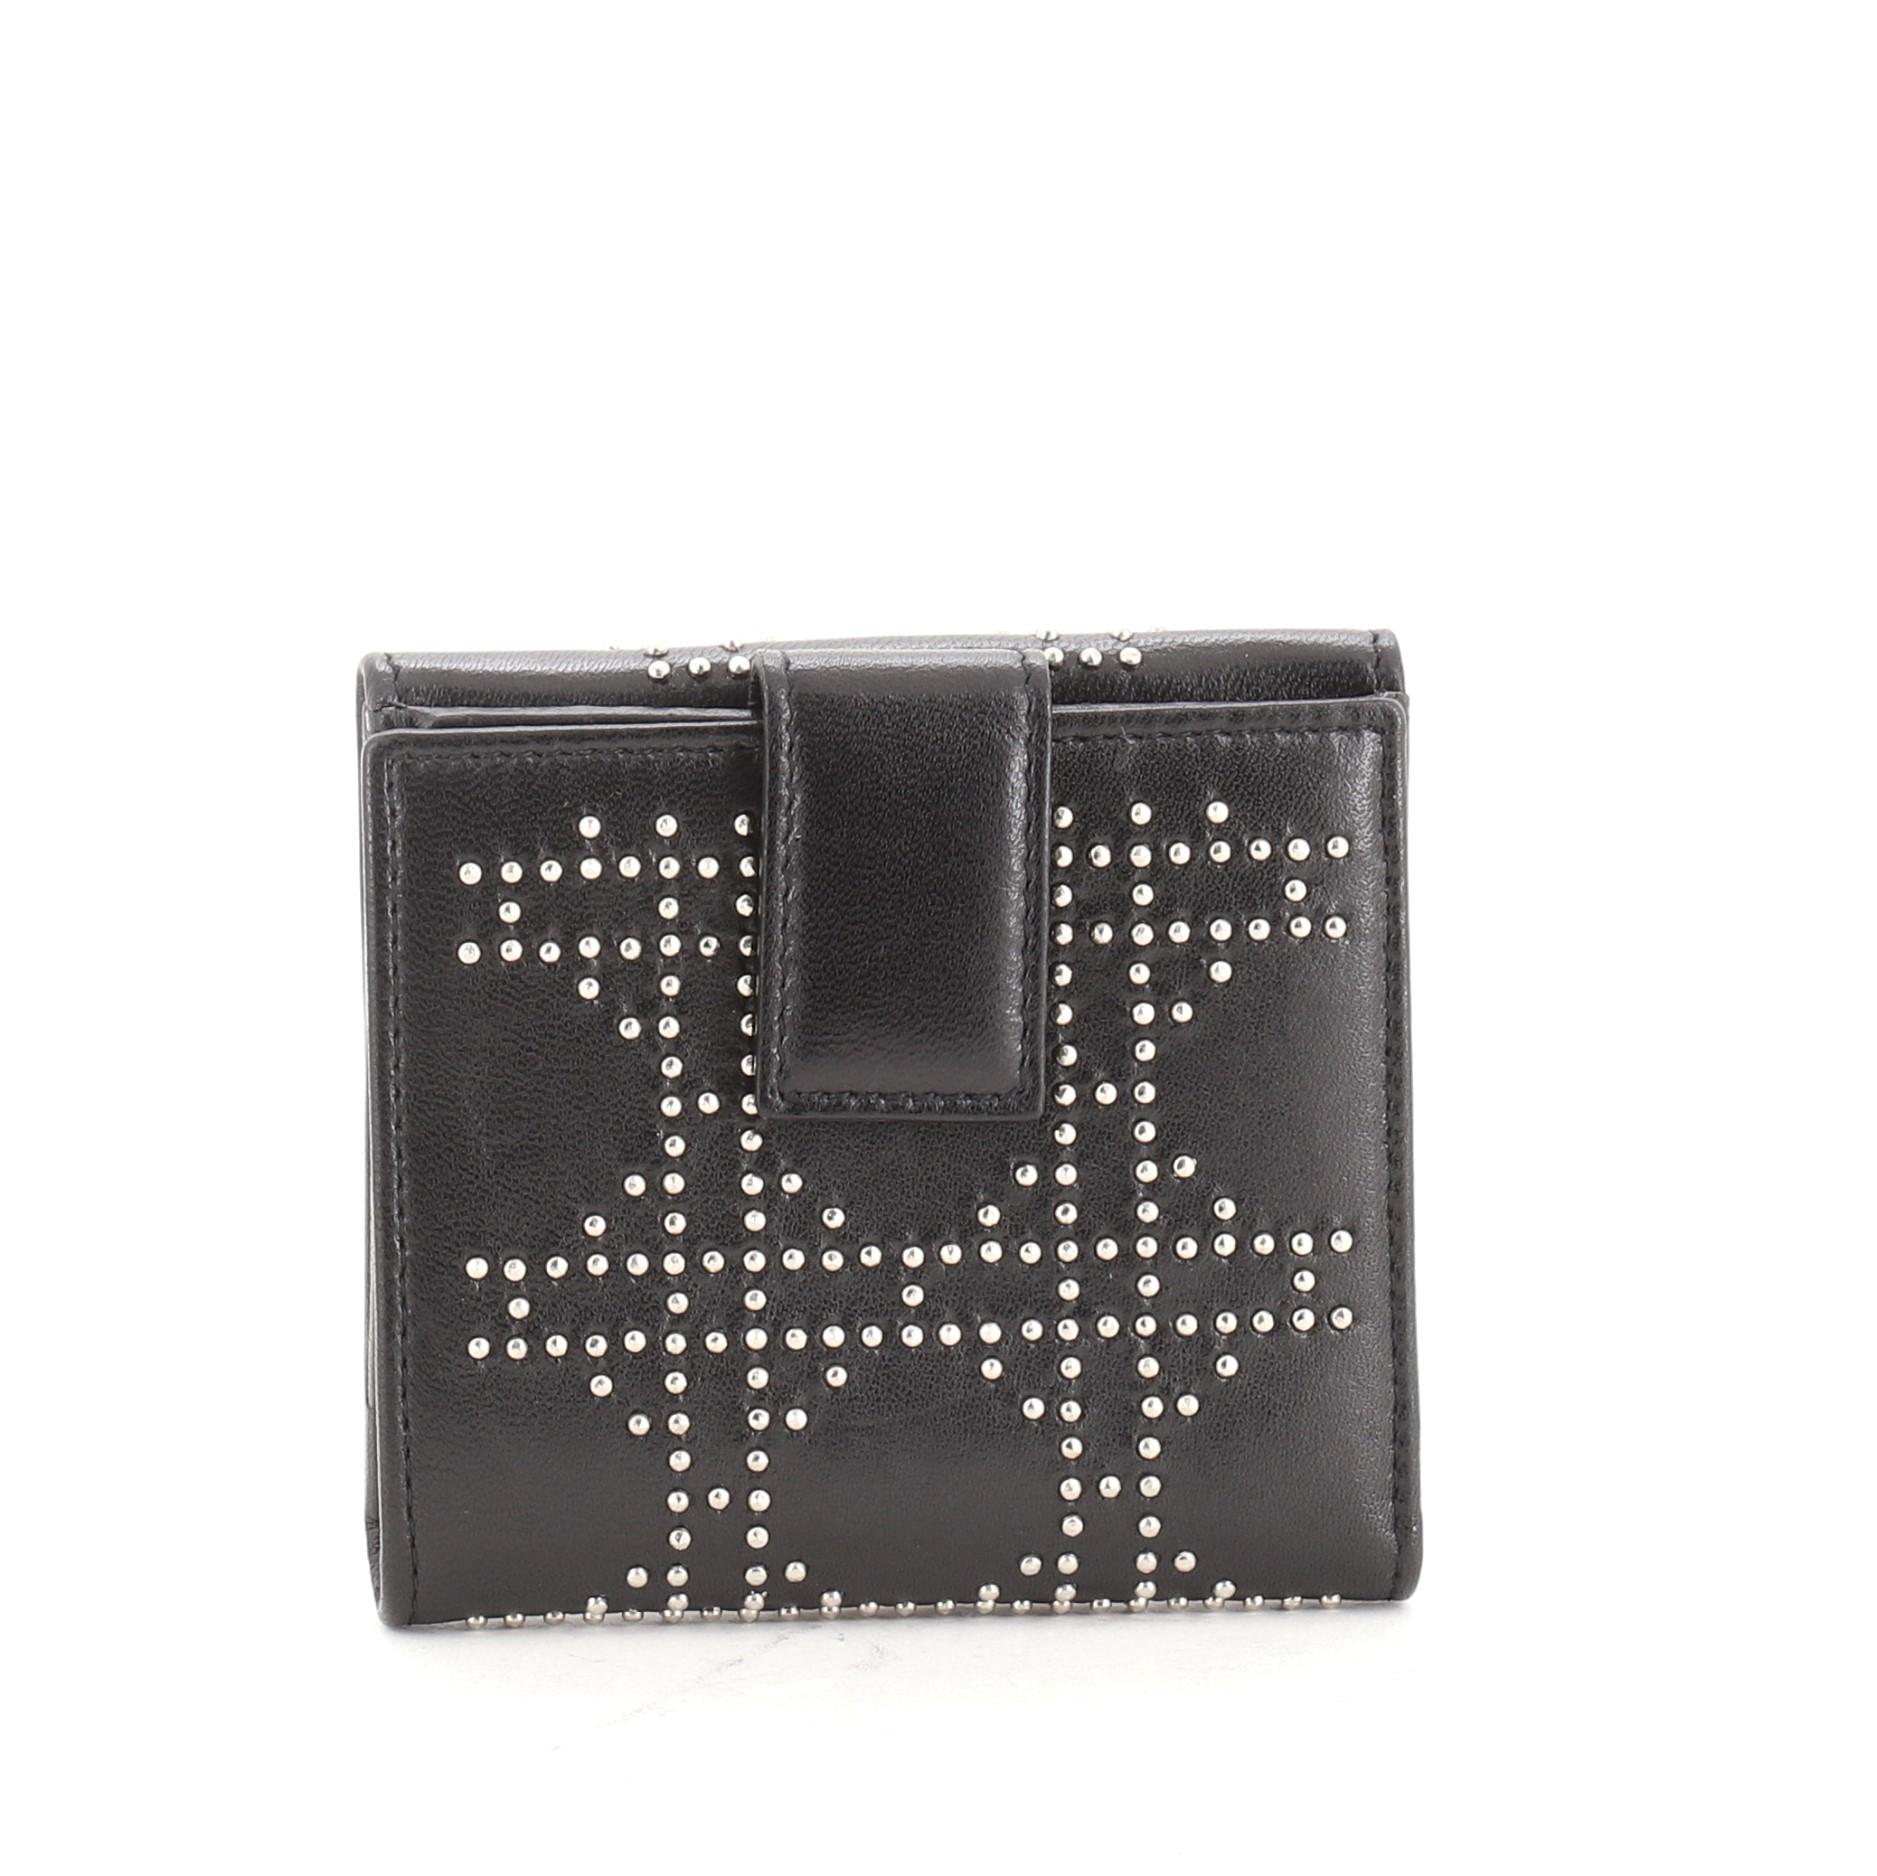 Christian Dior Bifold Wallet Cannage Studded Lambskin
Black Lambskin Stud

Condition Details: Scuffs and indentations on exterior, scratches on hardware.

45410MSC

Height 4